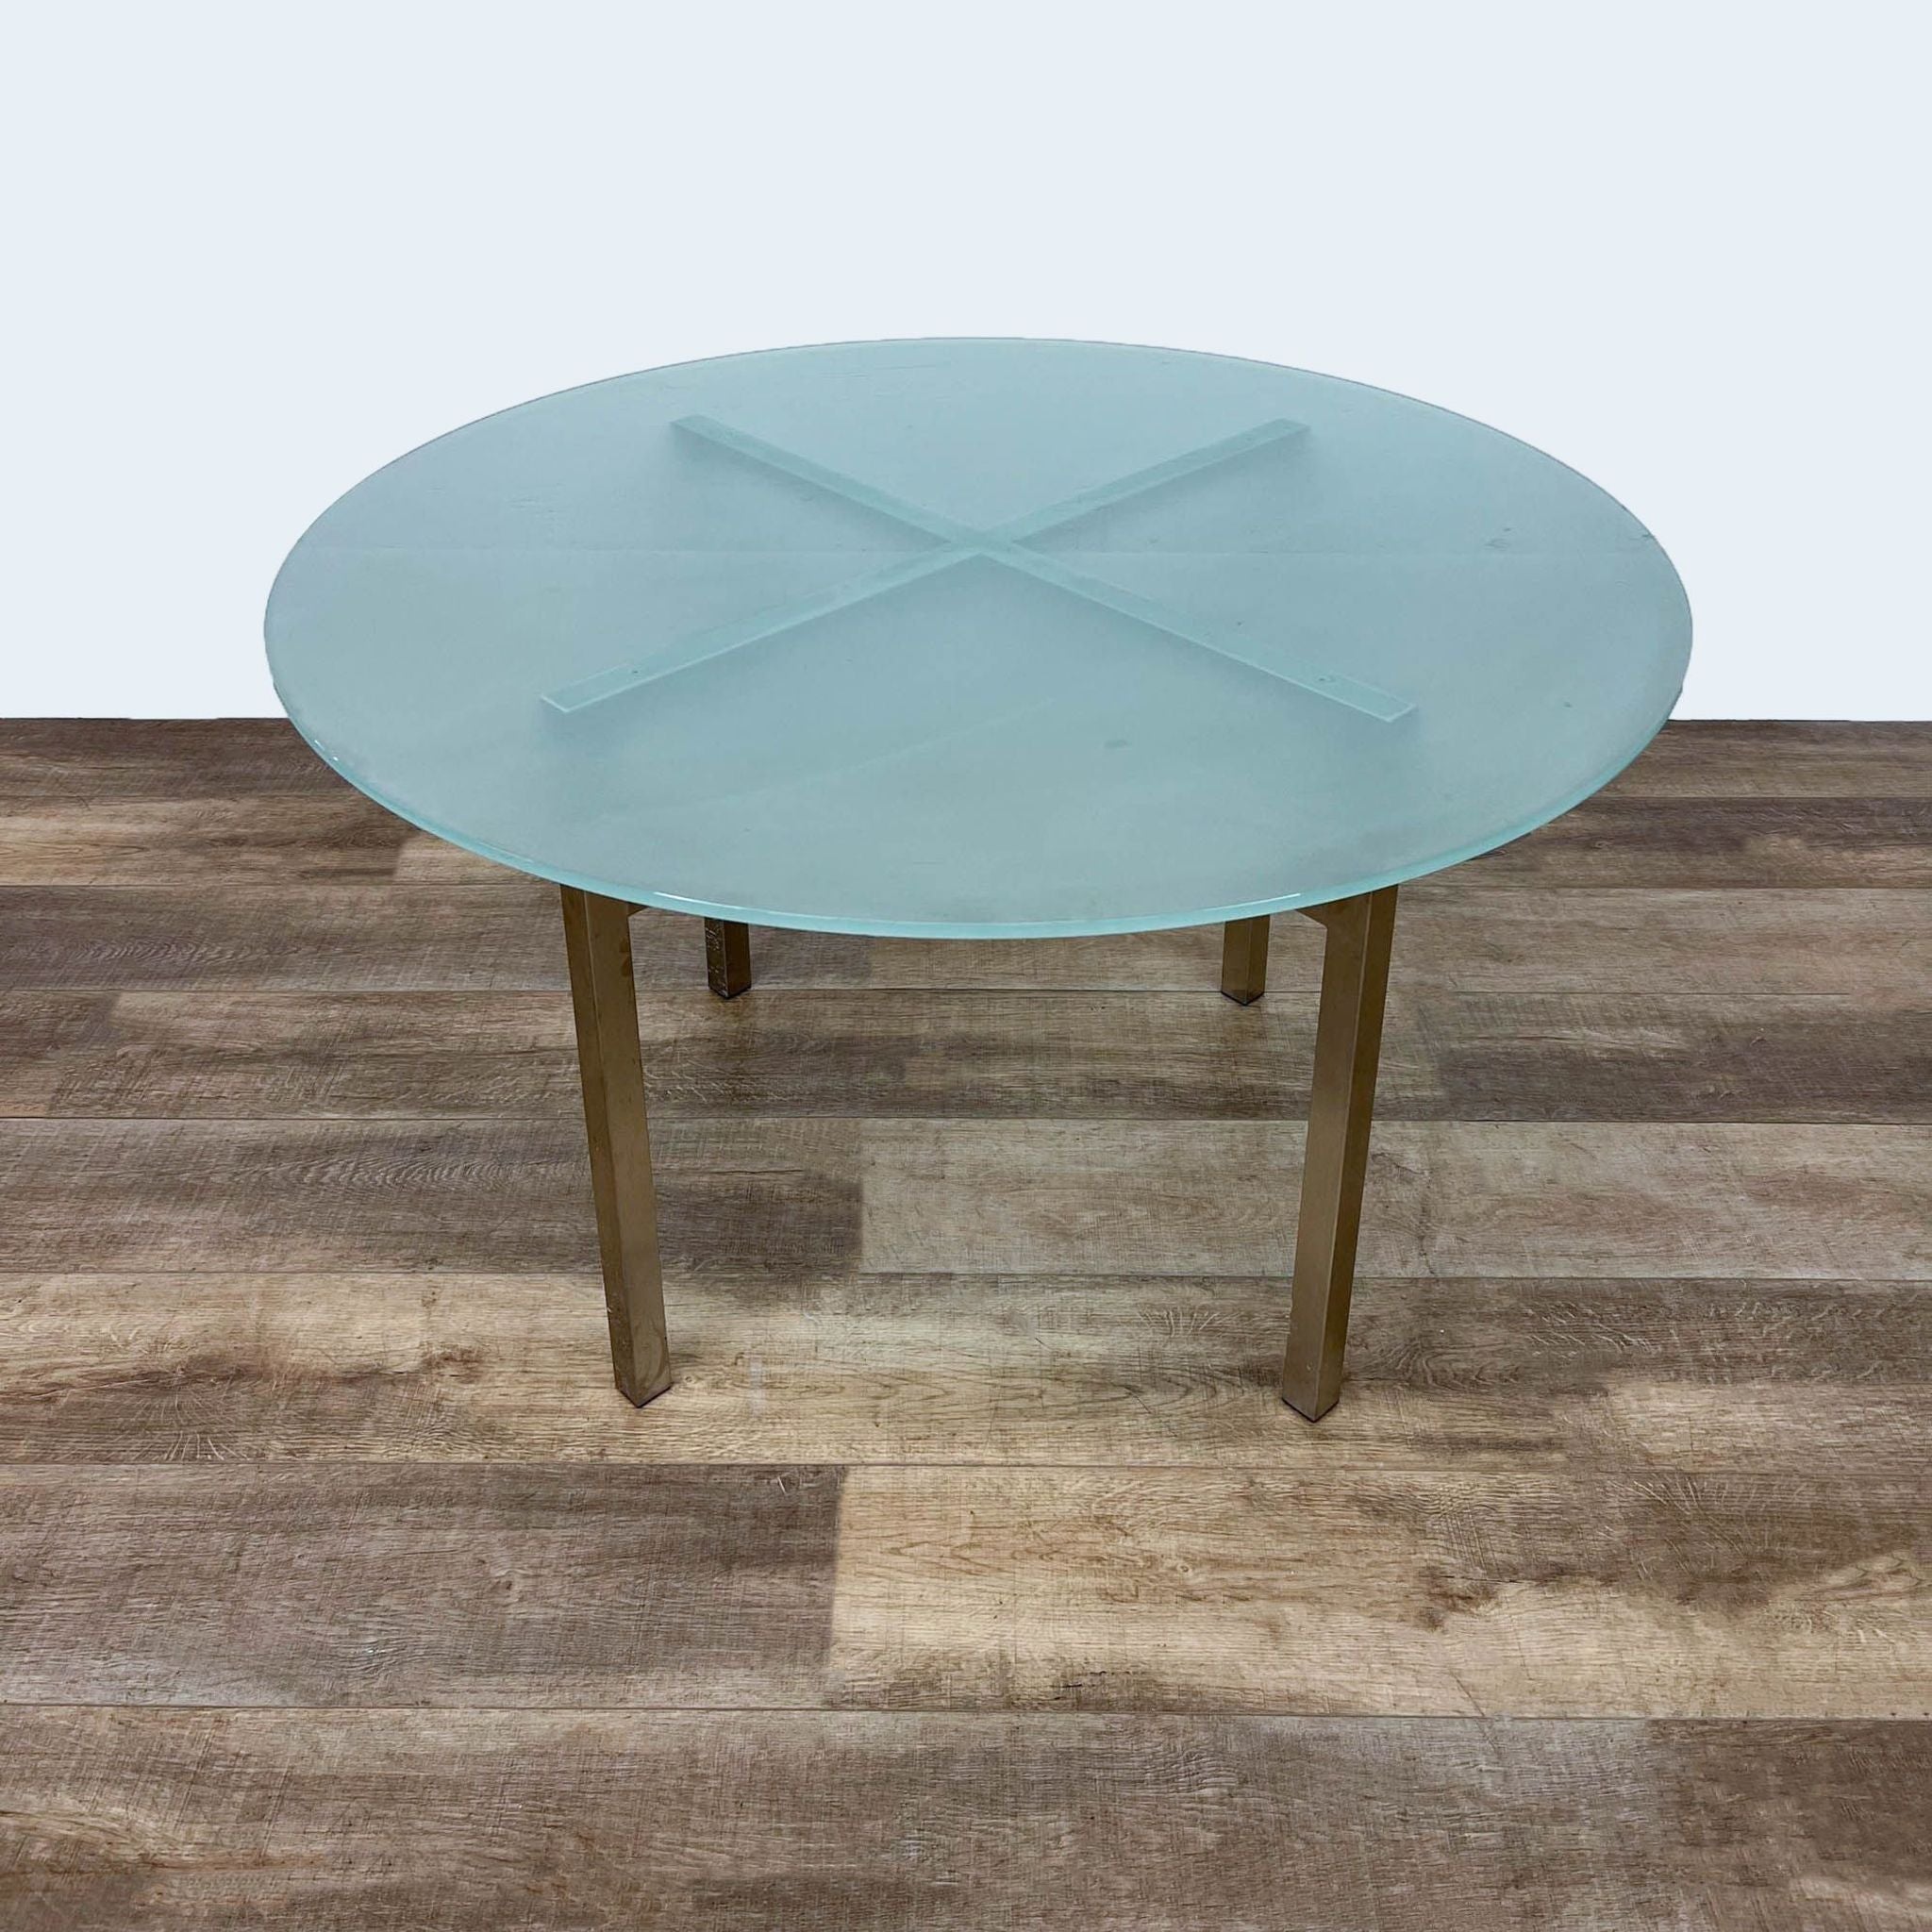 Room & Board's Benson round dining table featuring a tempered frosted glass top and a gold finish metal base.